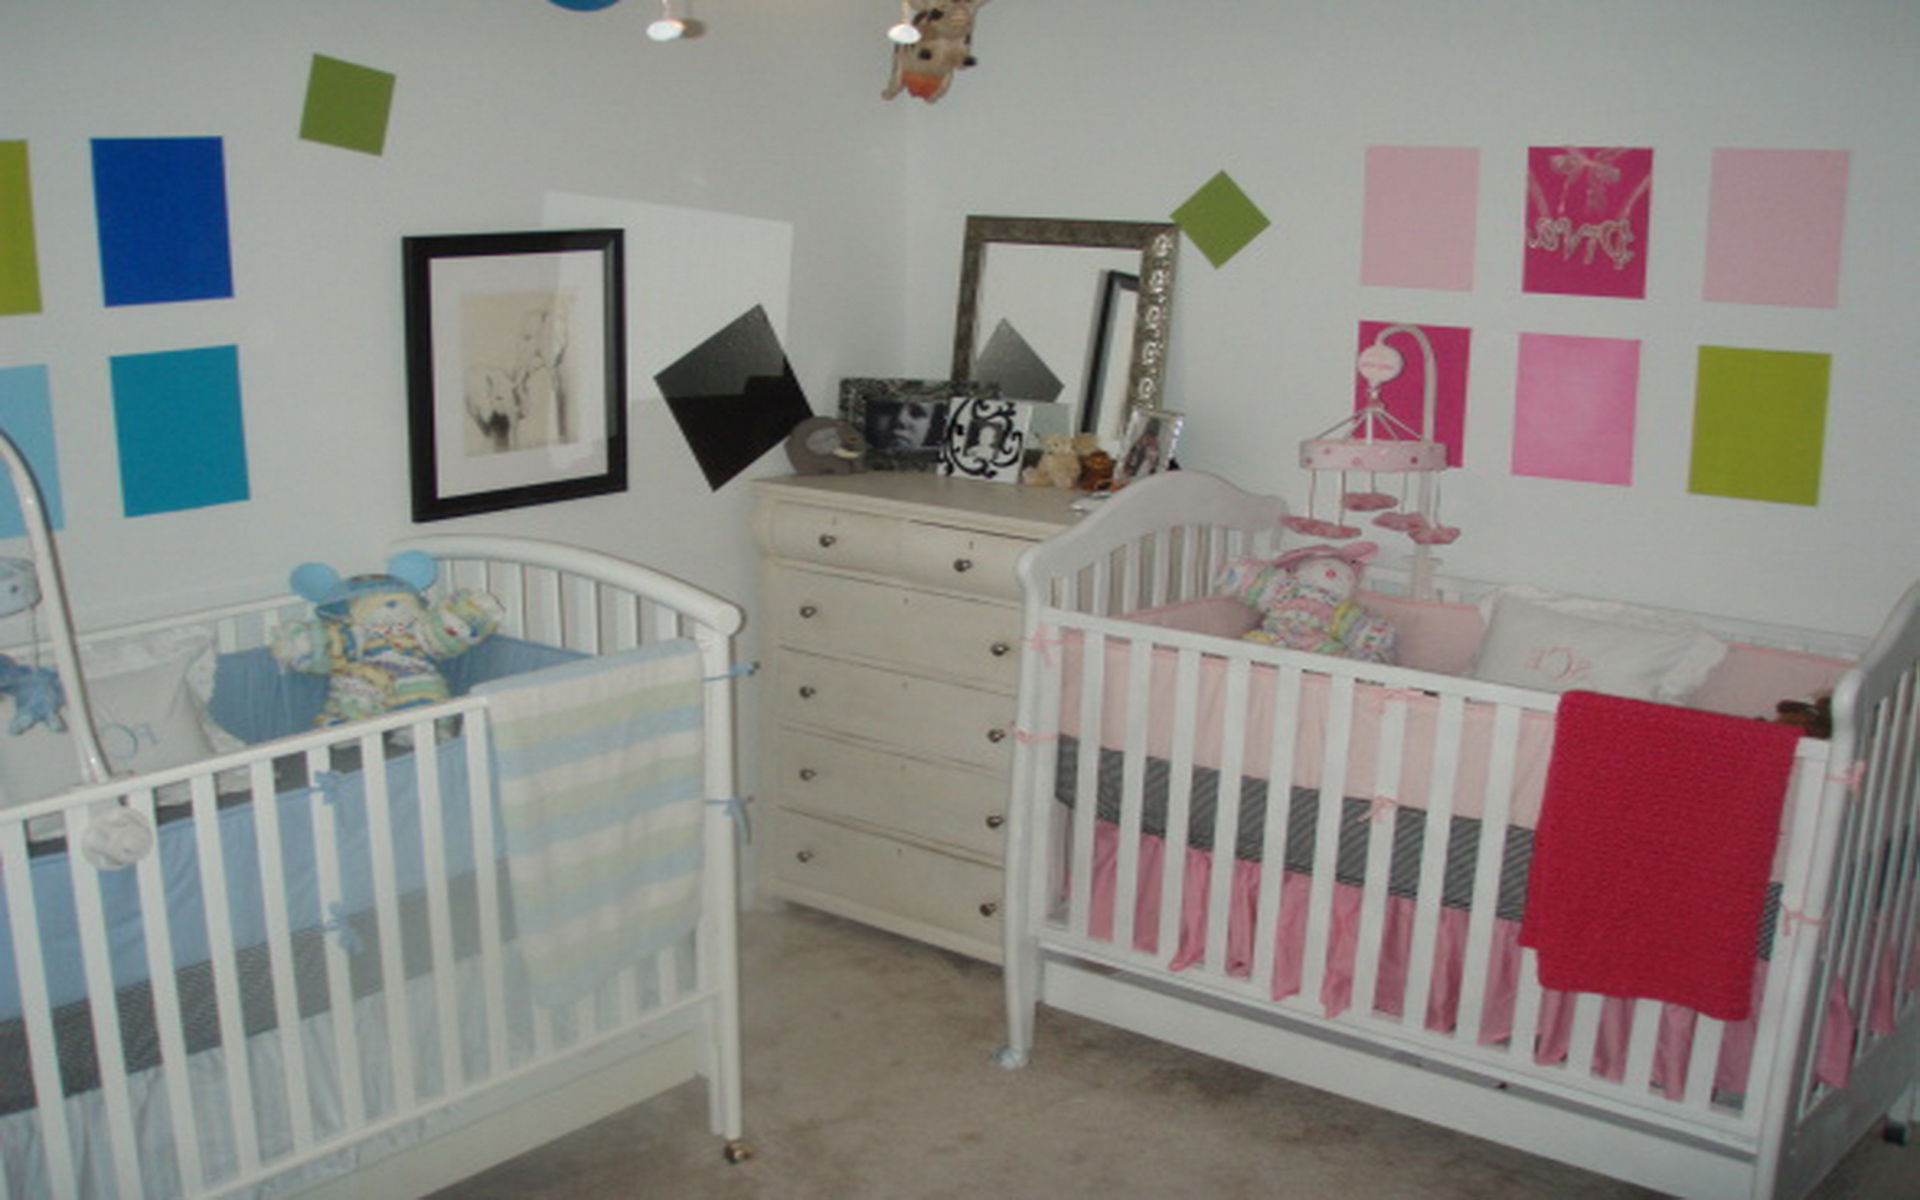 Baby Girl Nursery Trendy Baby Girl And Boy Nursery Idea Involving White Painted Best Baby Cribs With Dresser And Wall Arts Kids Room Marvelous Best Baby Cribs Designed In Twins Model For Small Room